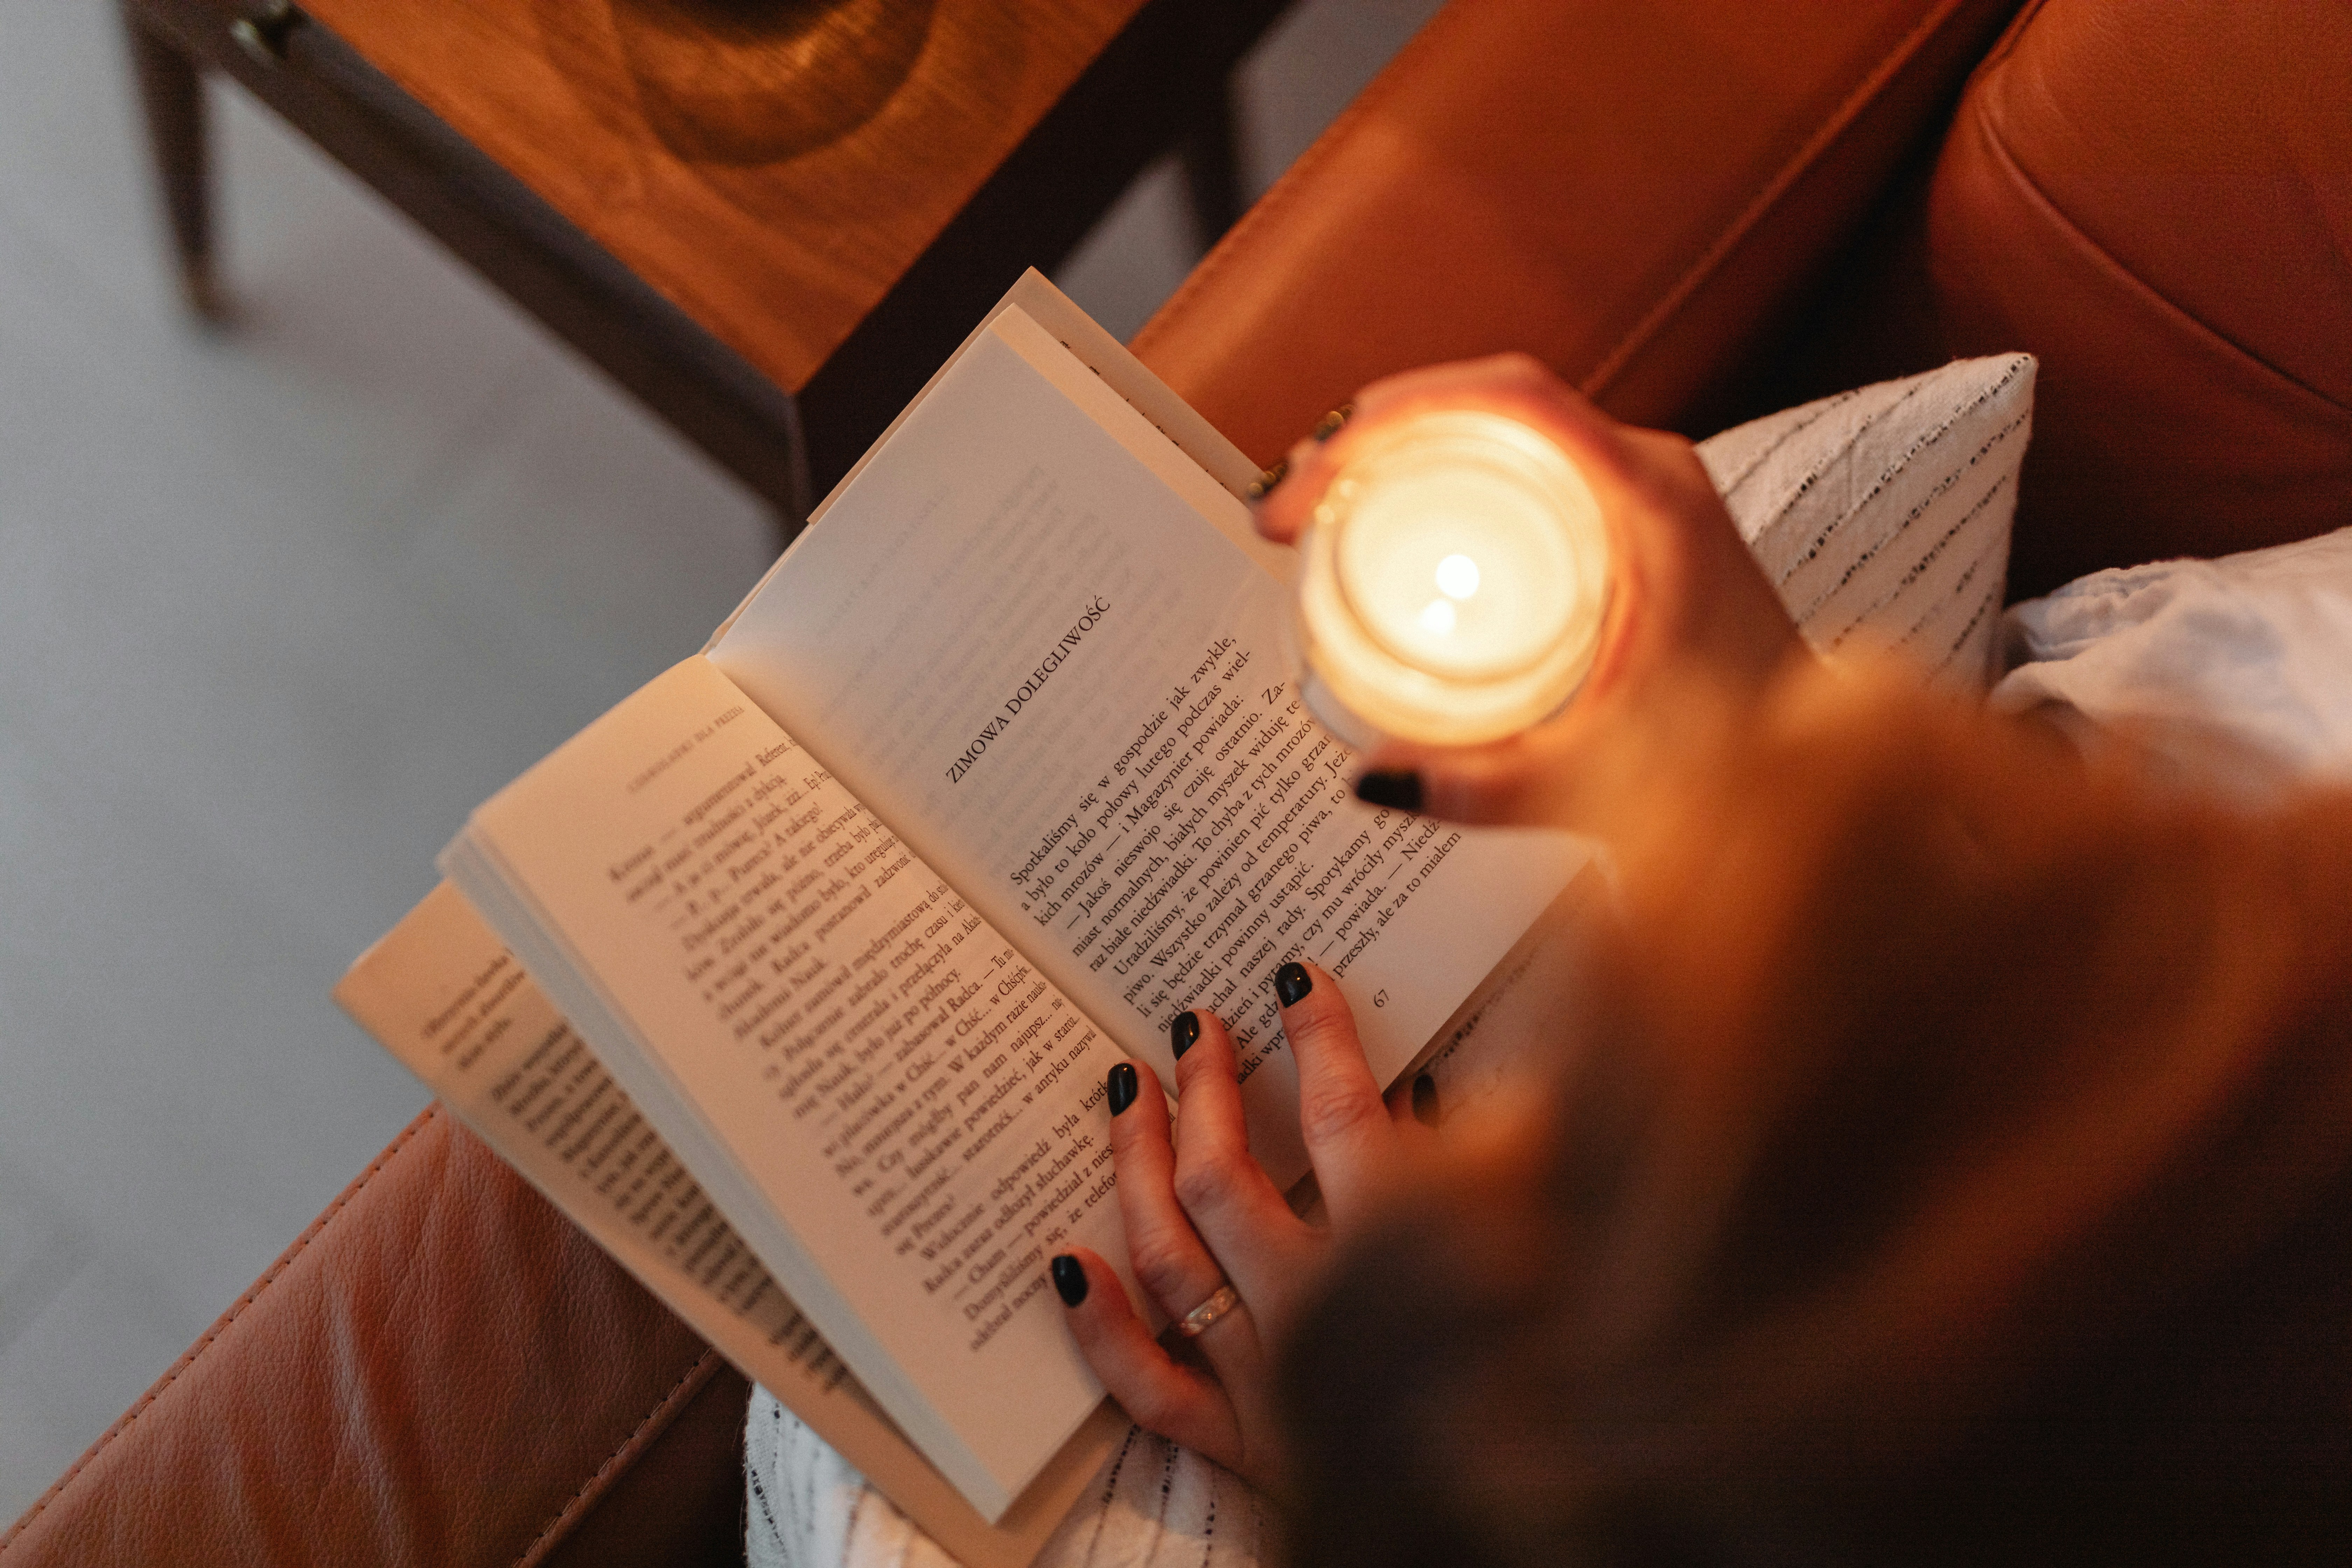 Woman reading a book by candlelight during a power outage.